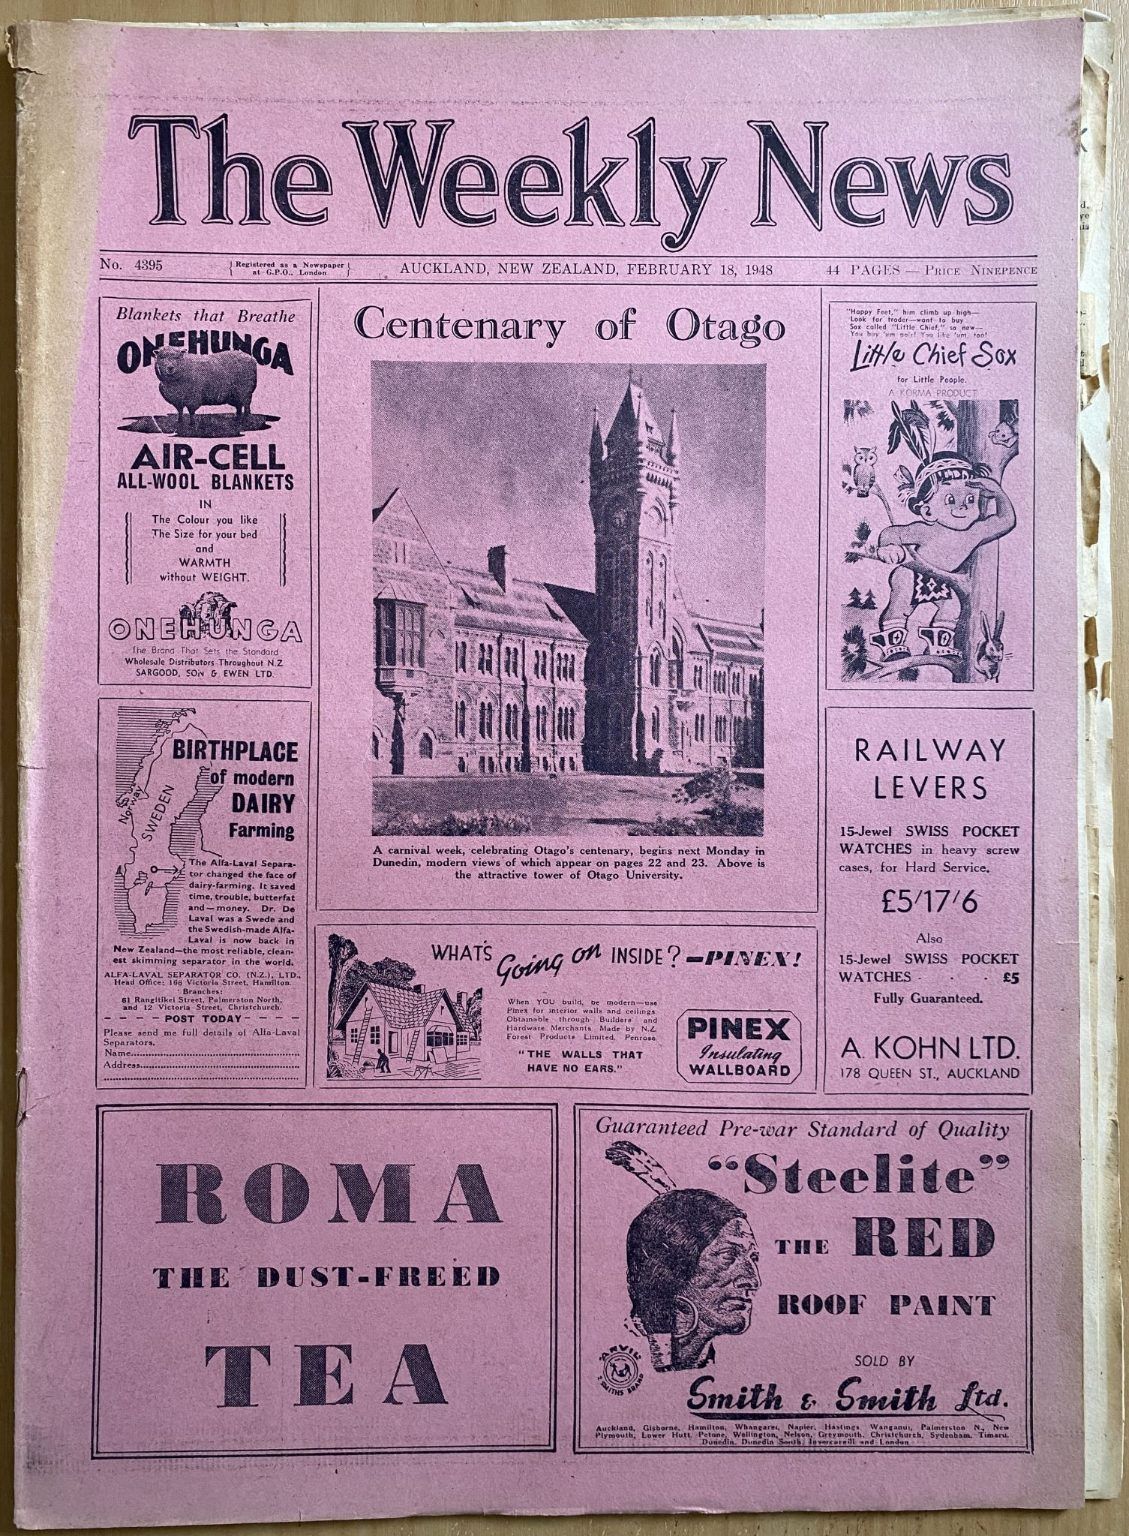 OLD NEWSPAPER: The Weekly News - No. 4395, 18 February 1948